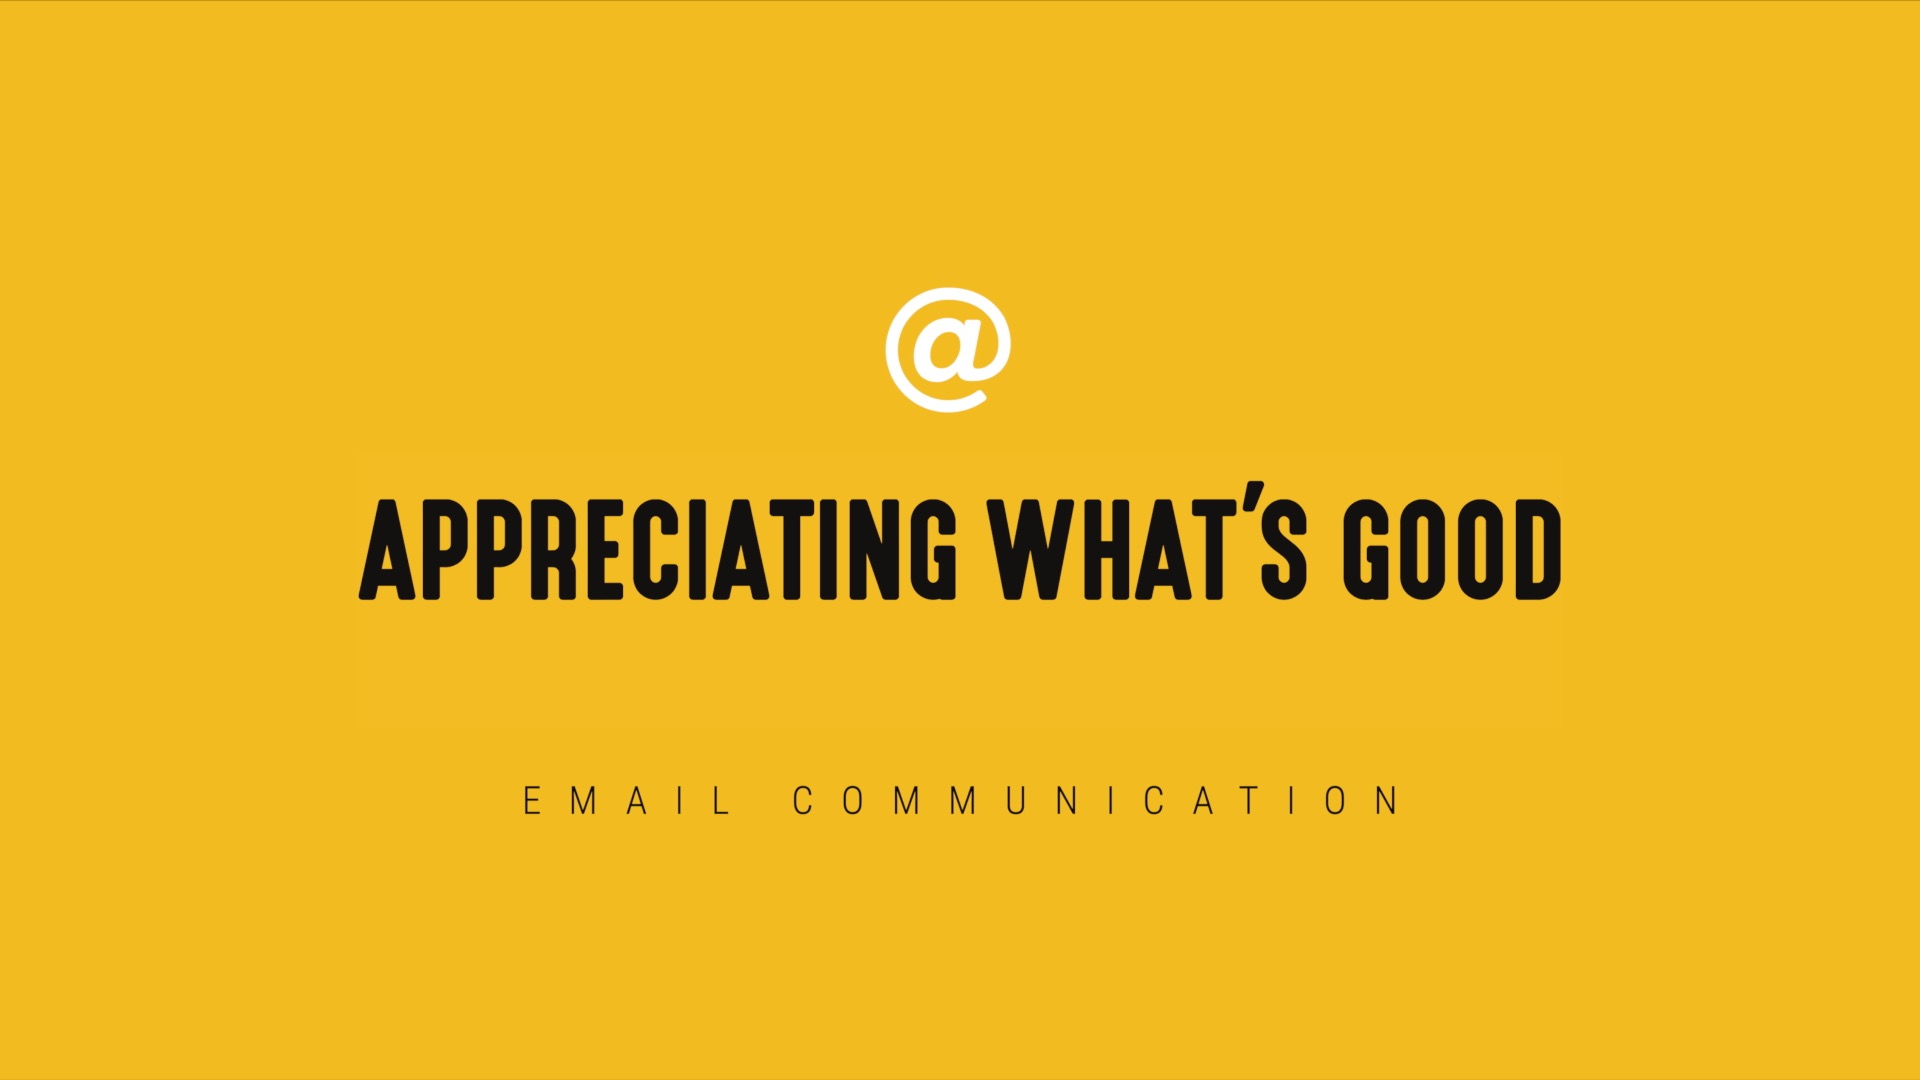 [NEW] Appreciating What's Good - Timely Email